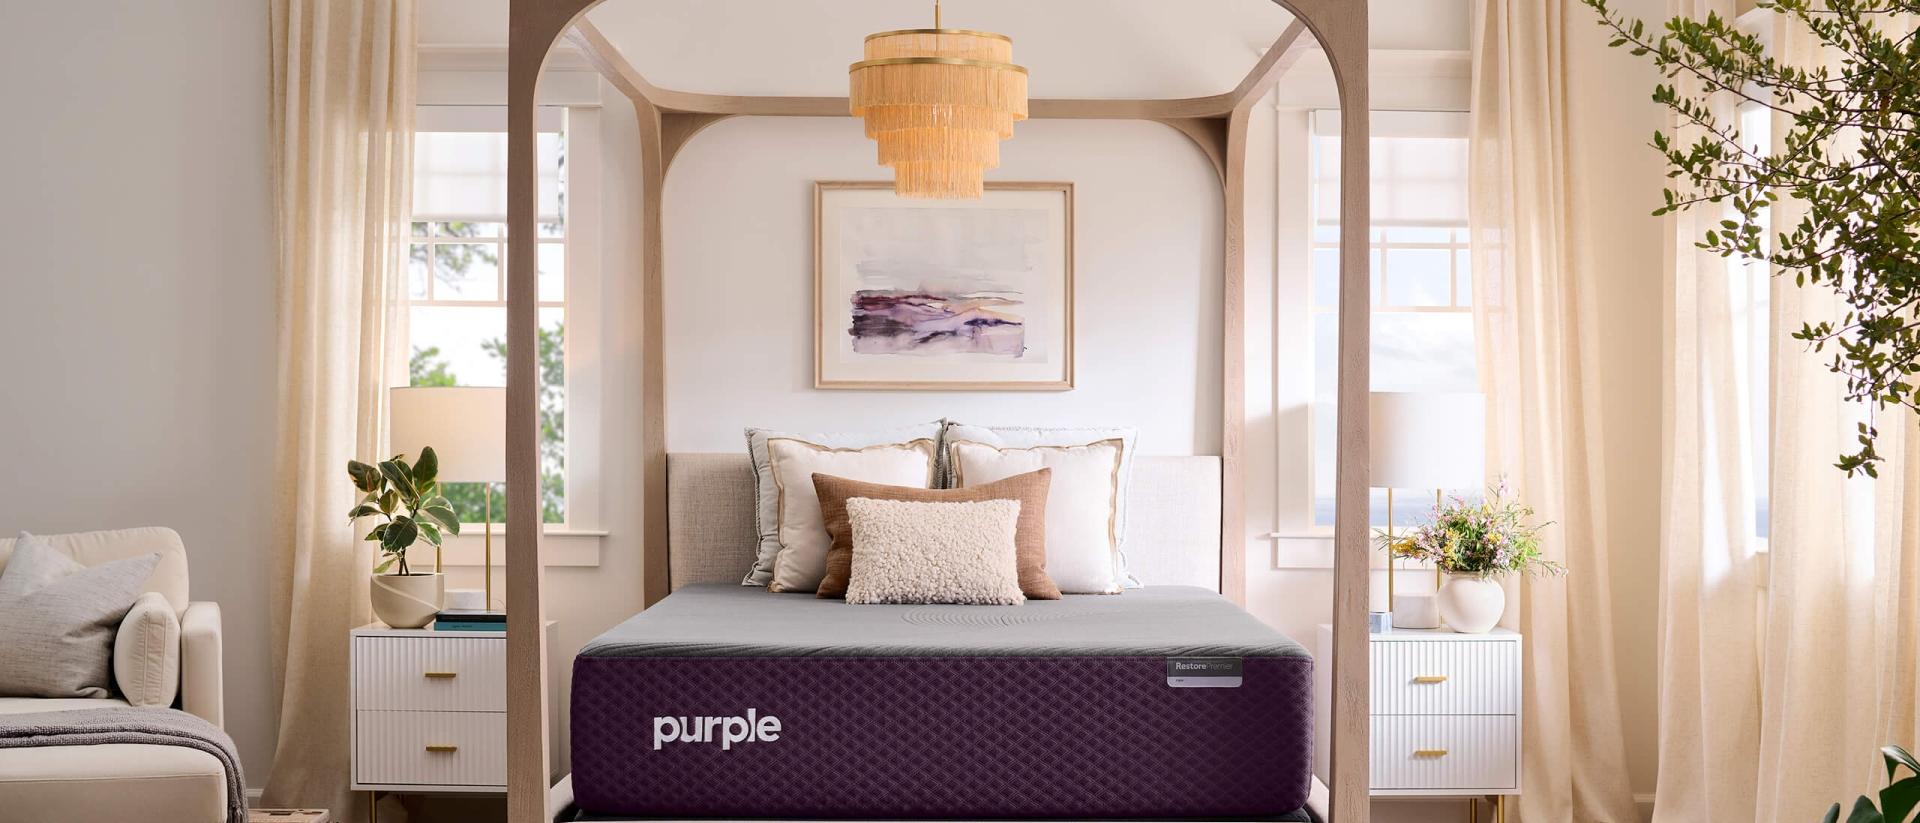 A Purple RestorePremier Hybrid mattress sits on a four poster canopy bed frame in a bedroom with ivory accents.